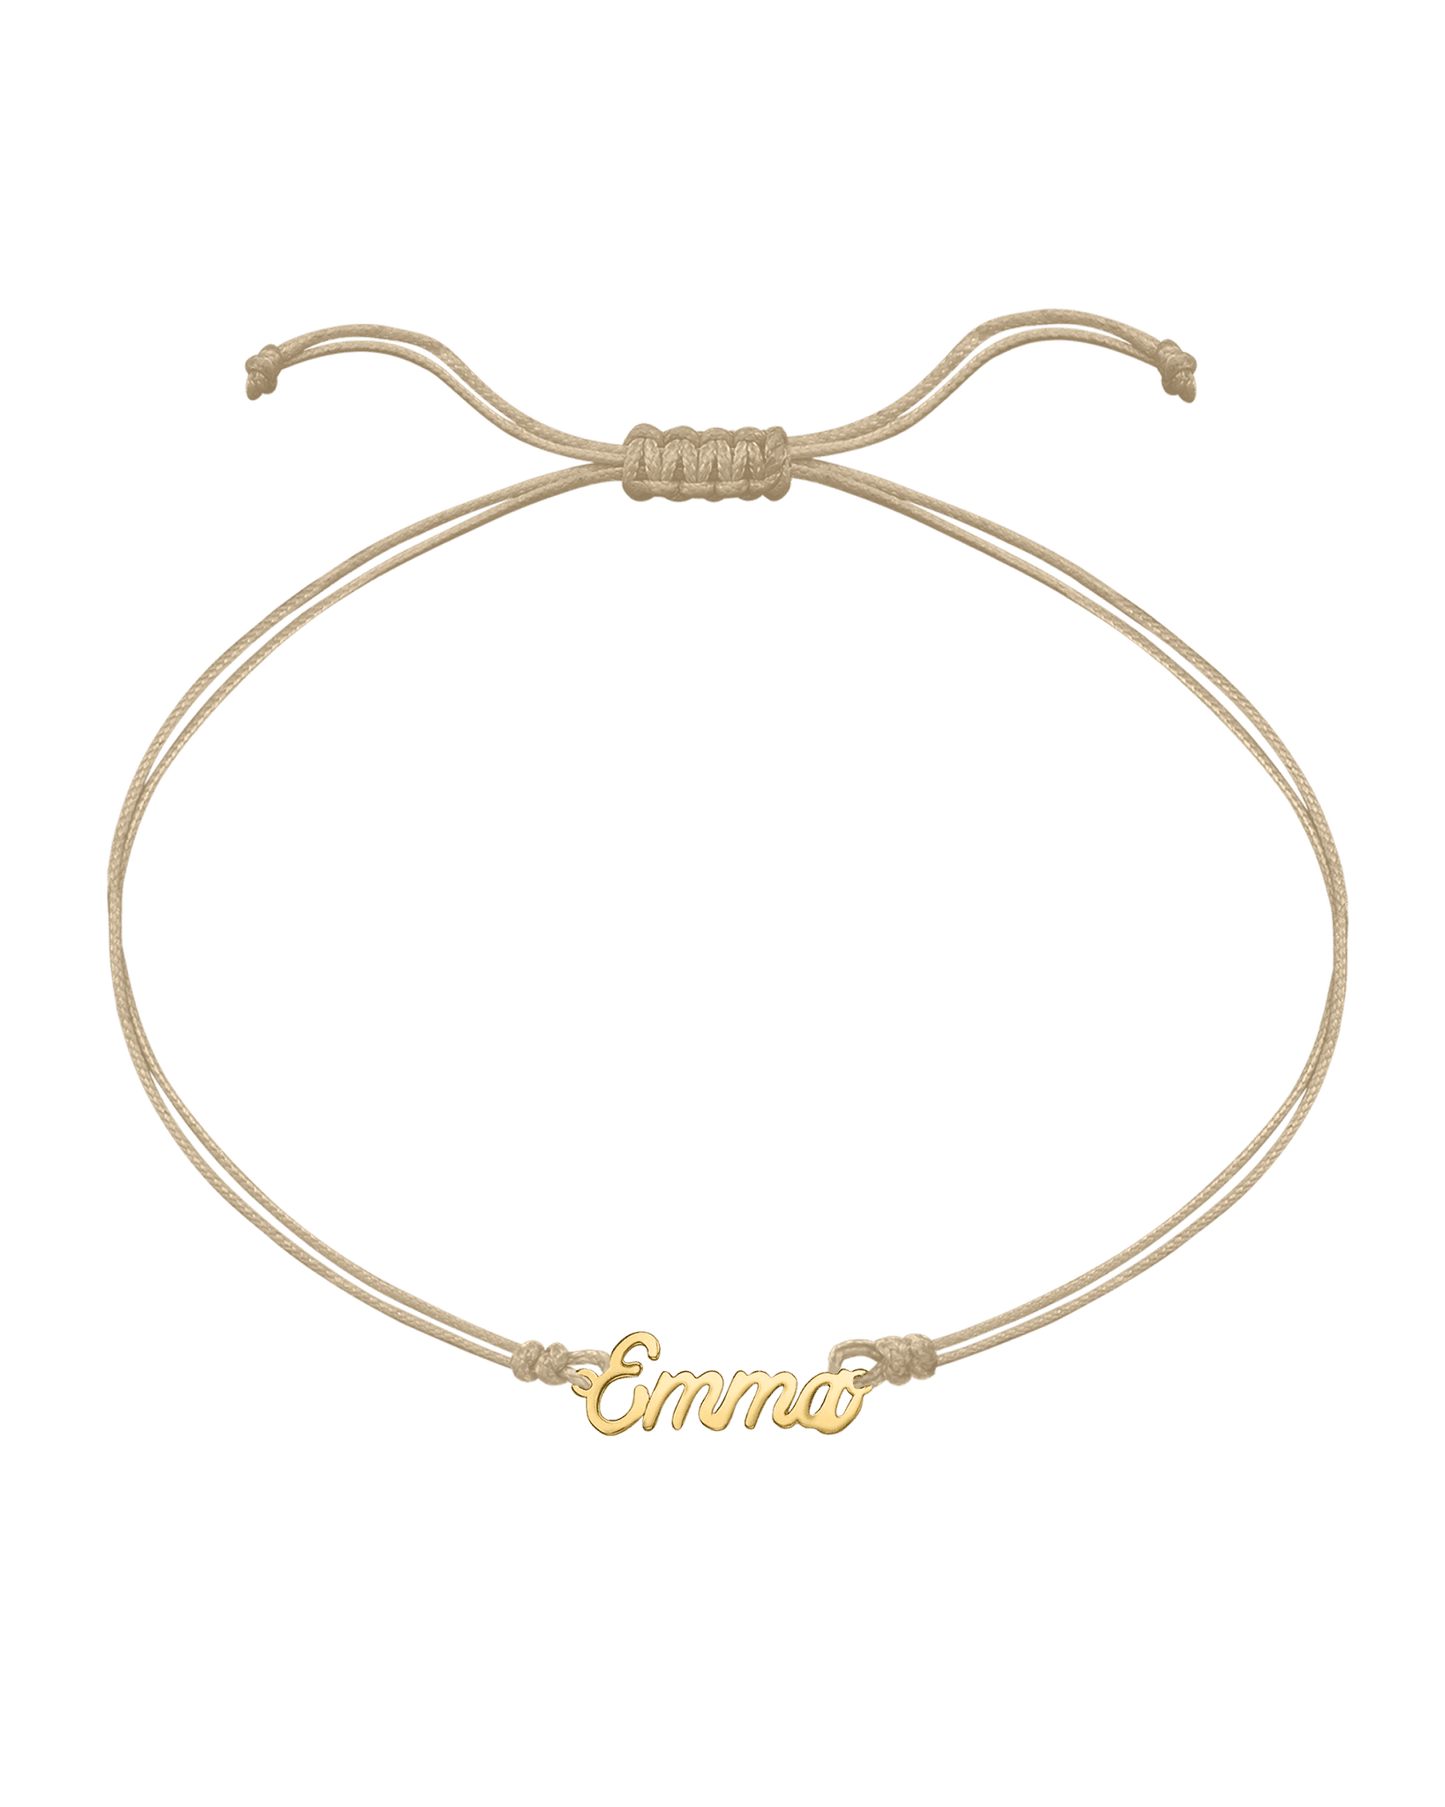 Name Plate String of Love - 14K Yellow Gold Bracelets 14K Solid Gold Sand 1 